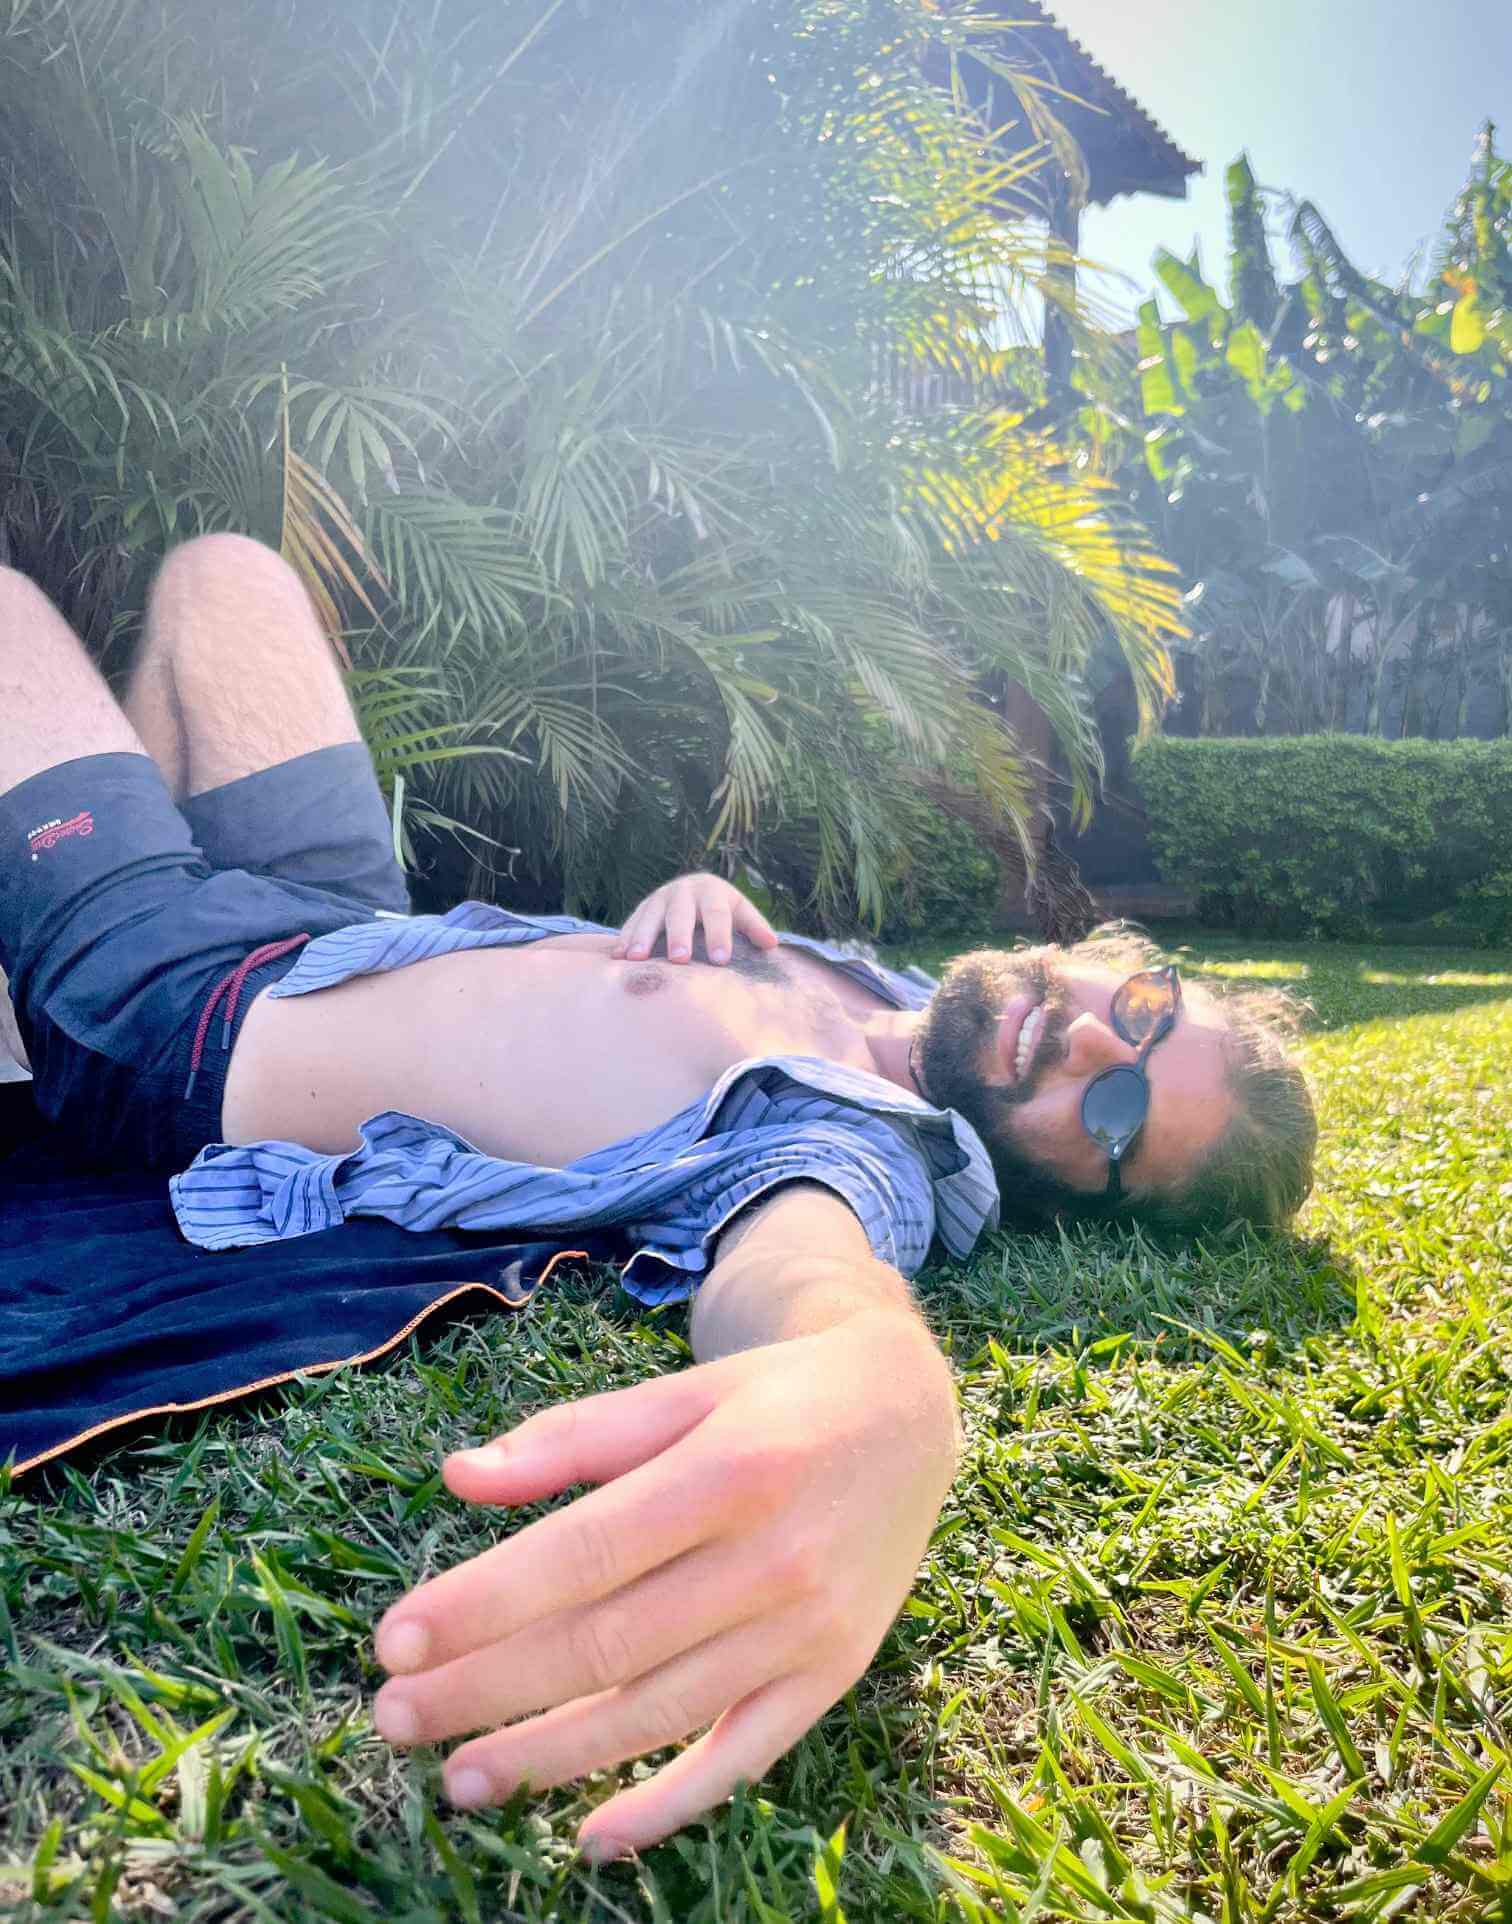 a hostel volunteer chills on the grass before his shift starts in buzios, brazil